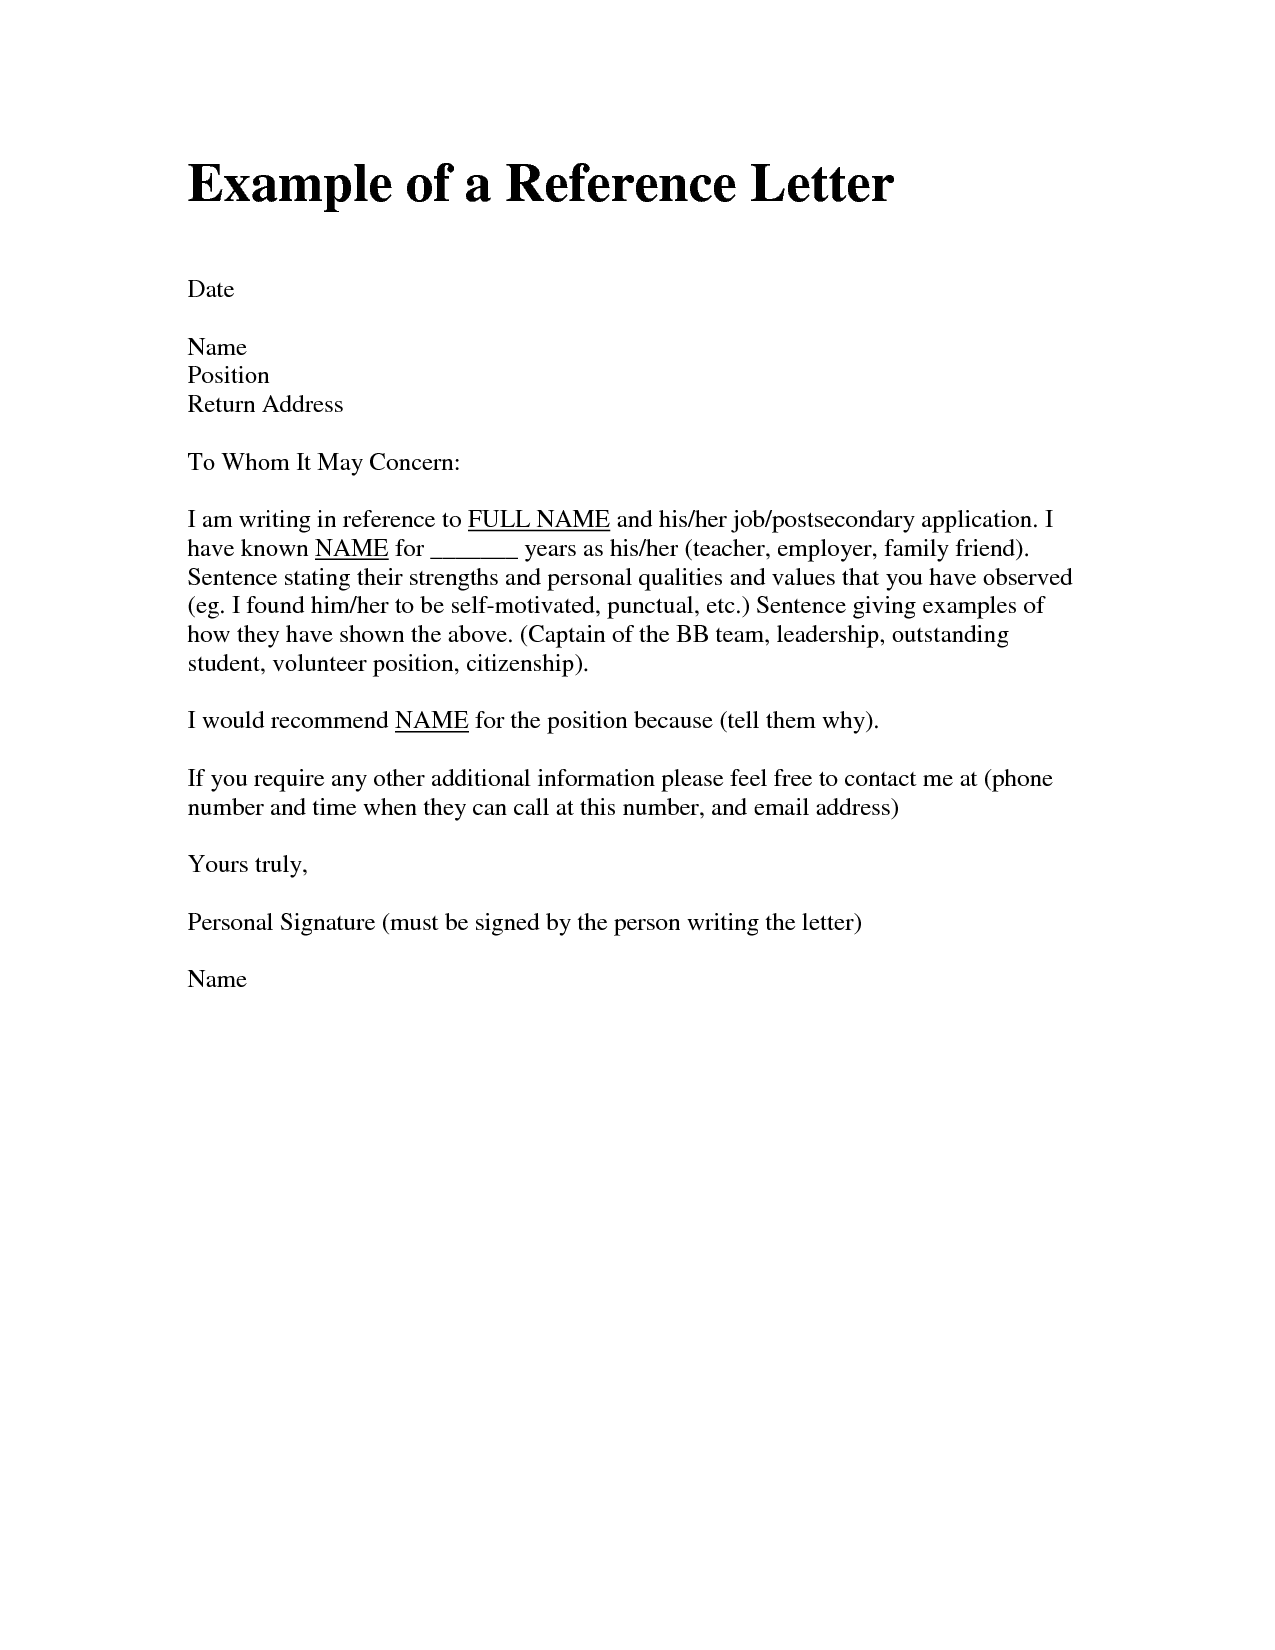 Personal Character Reference Letter for A Friend Sample Personal 